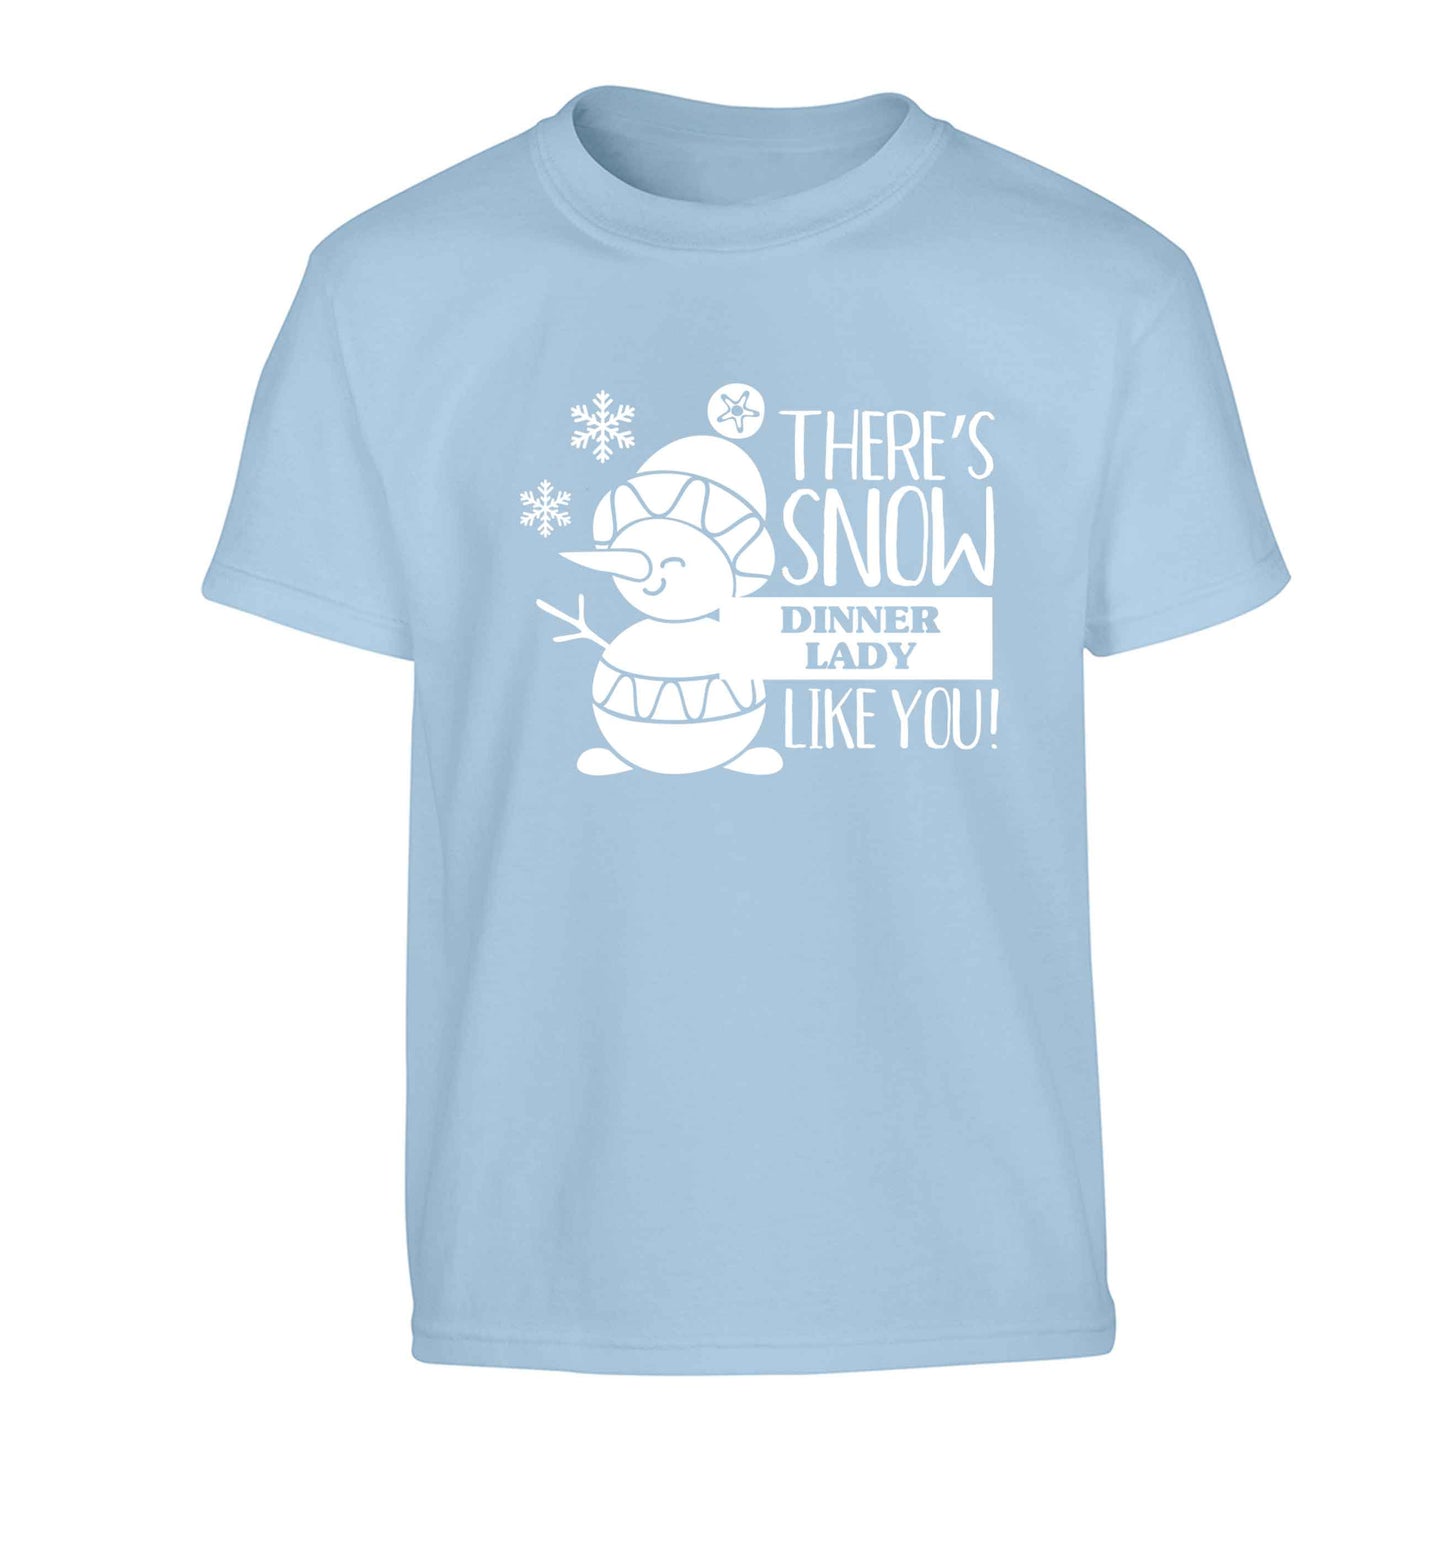 There's snow dinner lady like you Children's light blue Tshirt 12-13 Years